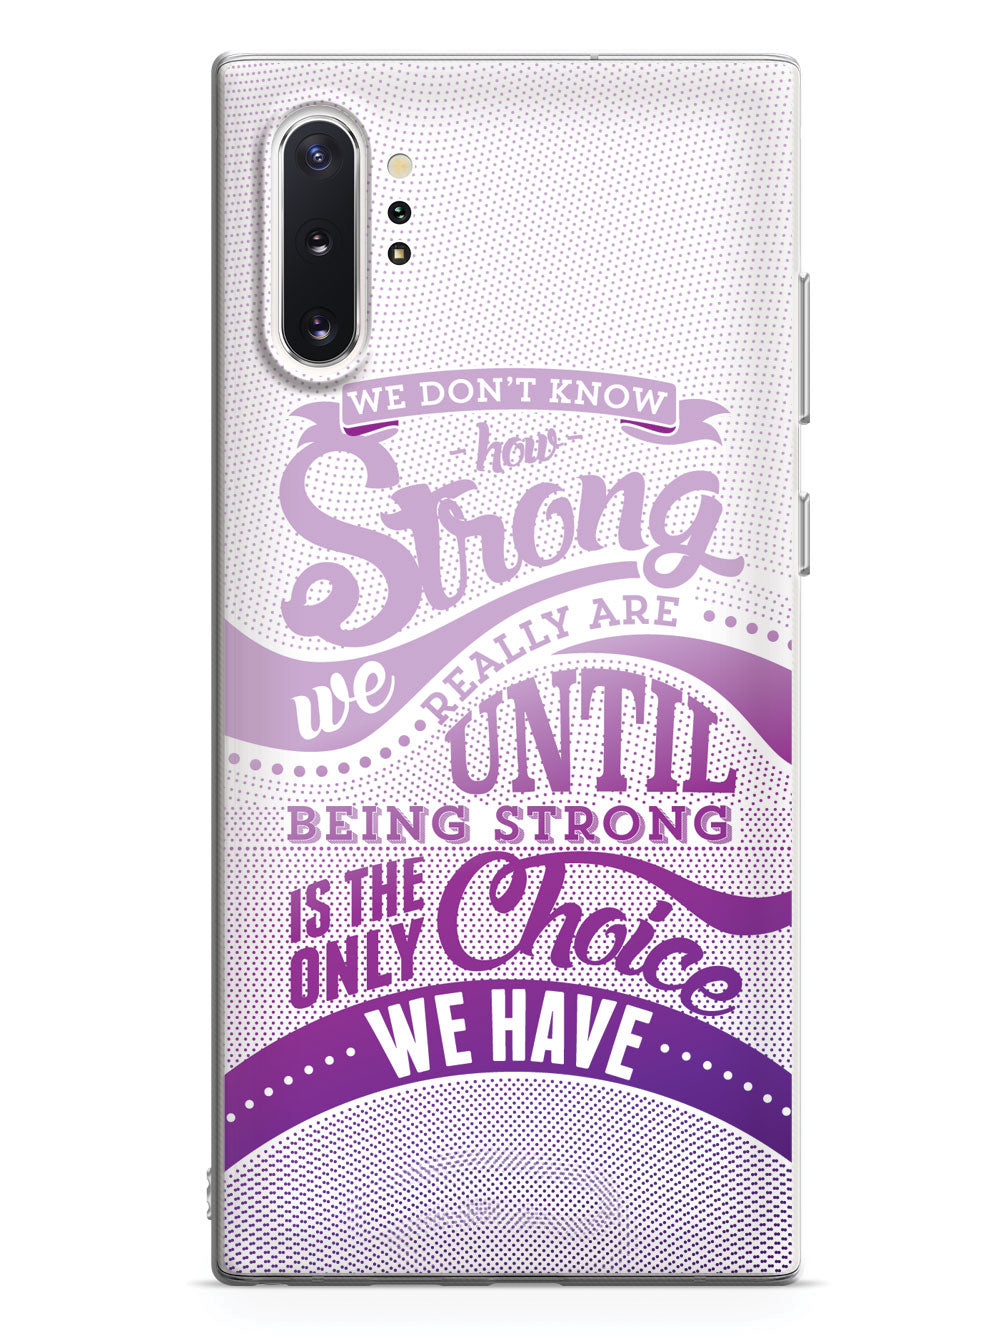 How Strong - Purple Awareness/Support Case